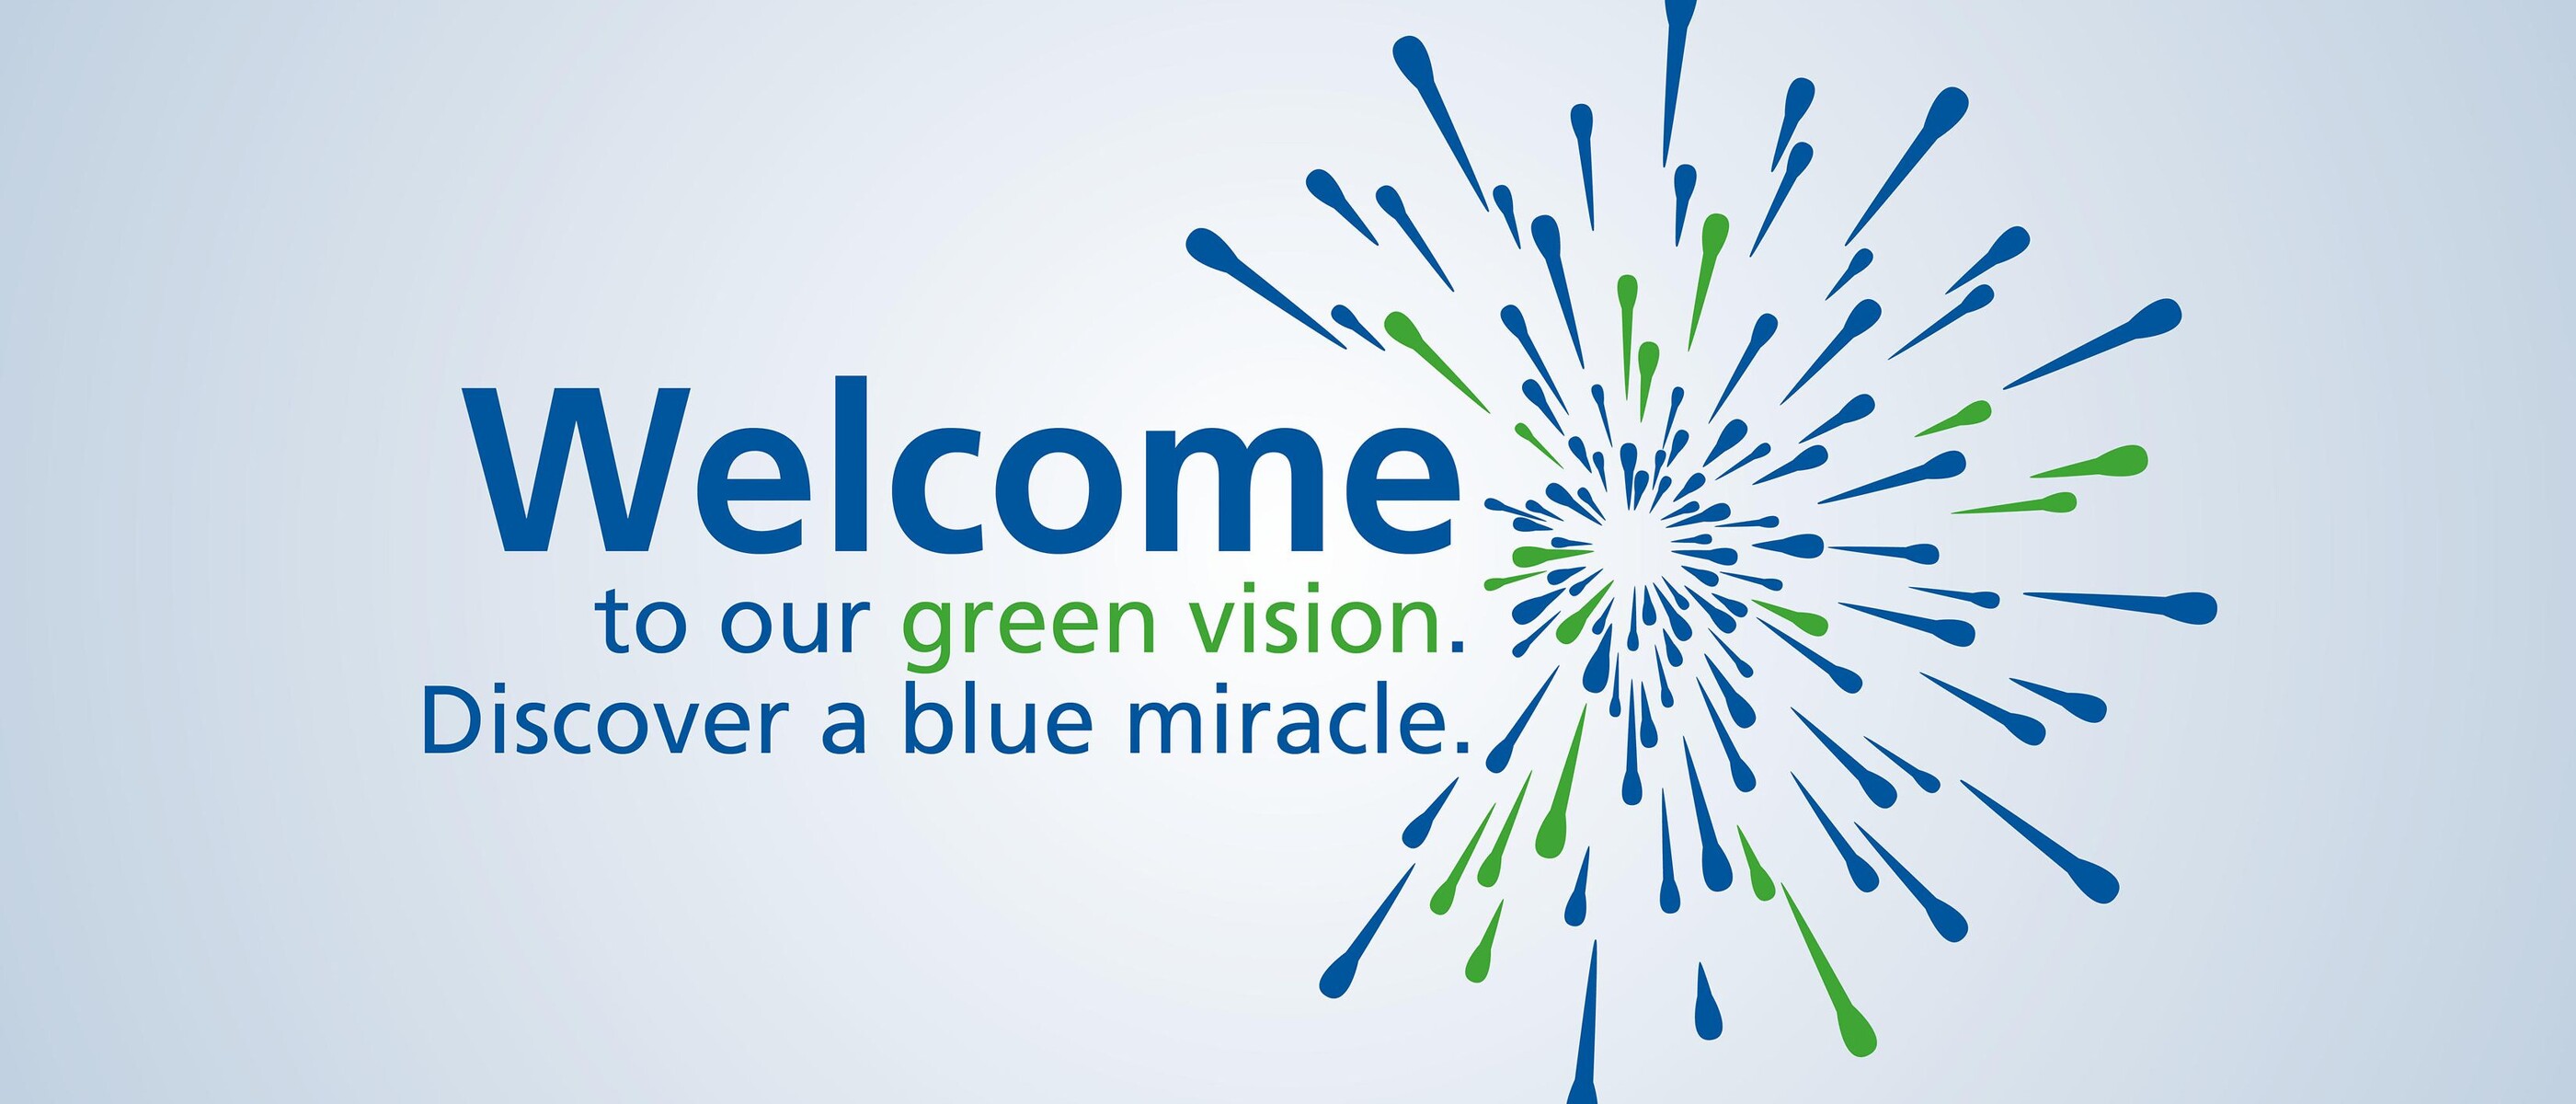 Welcome to our green vision. Discover a blue miracle. KSB at IFAT 2022